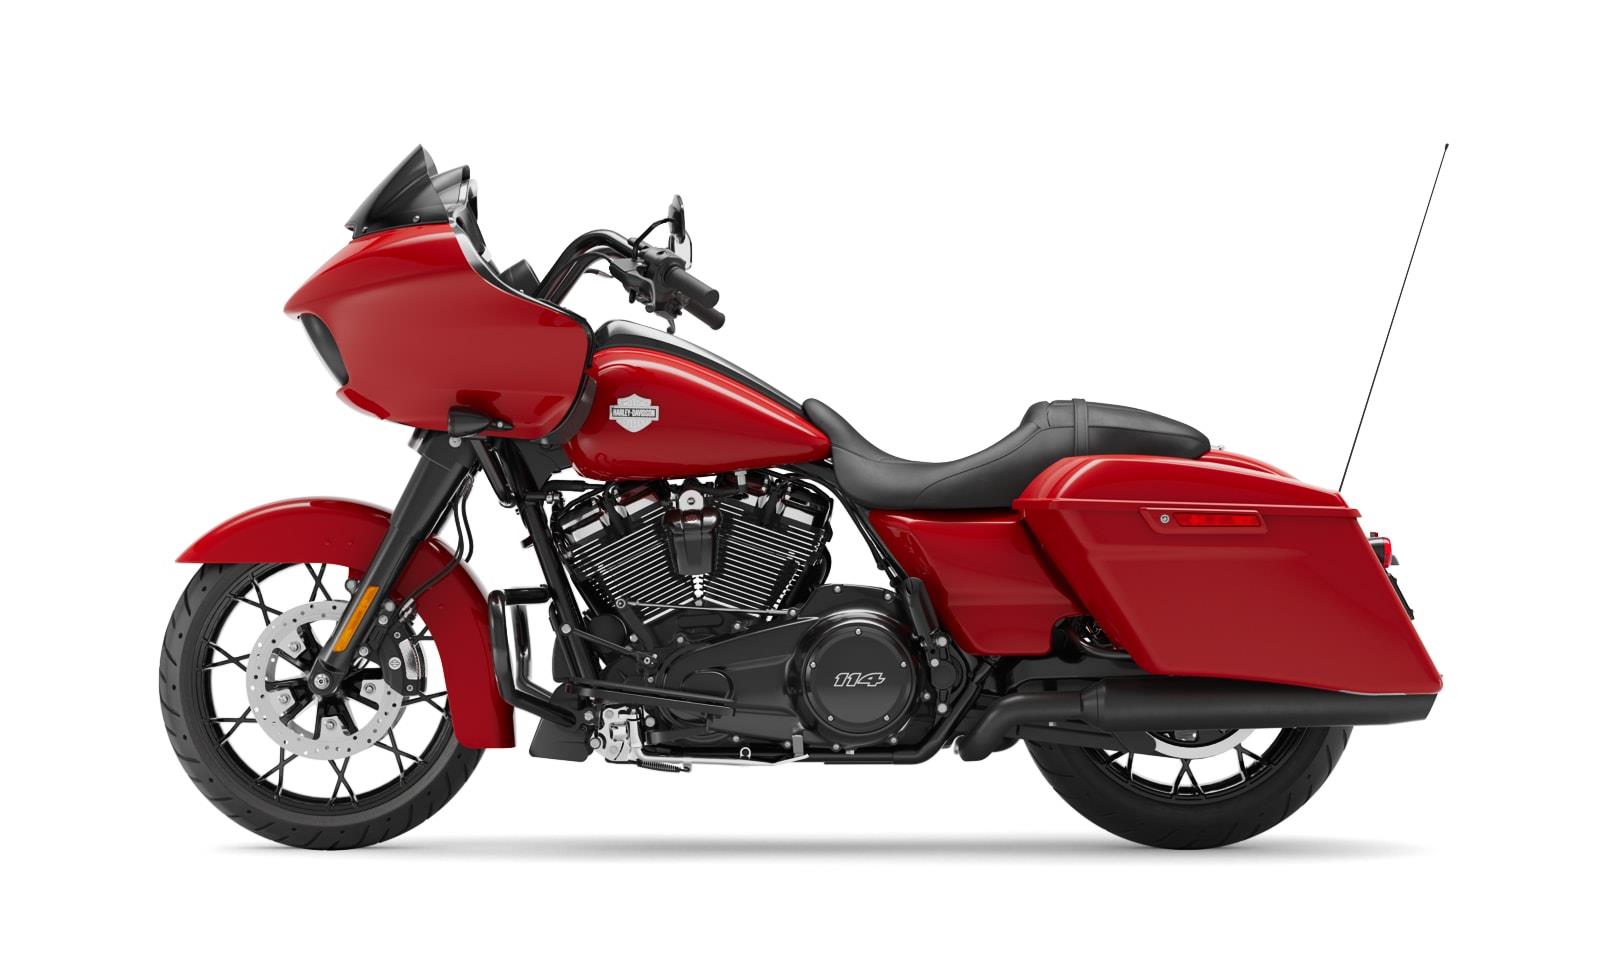 2023 Harley-Davidson Road Glide Special Price, Specs, Top Speed ...